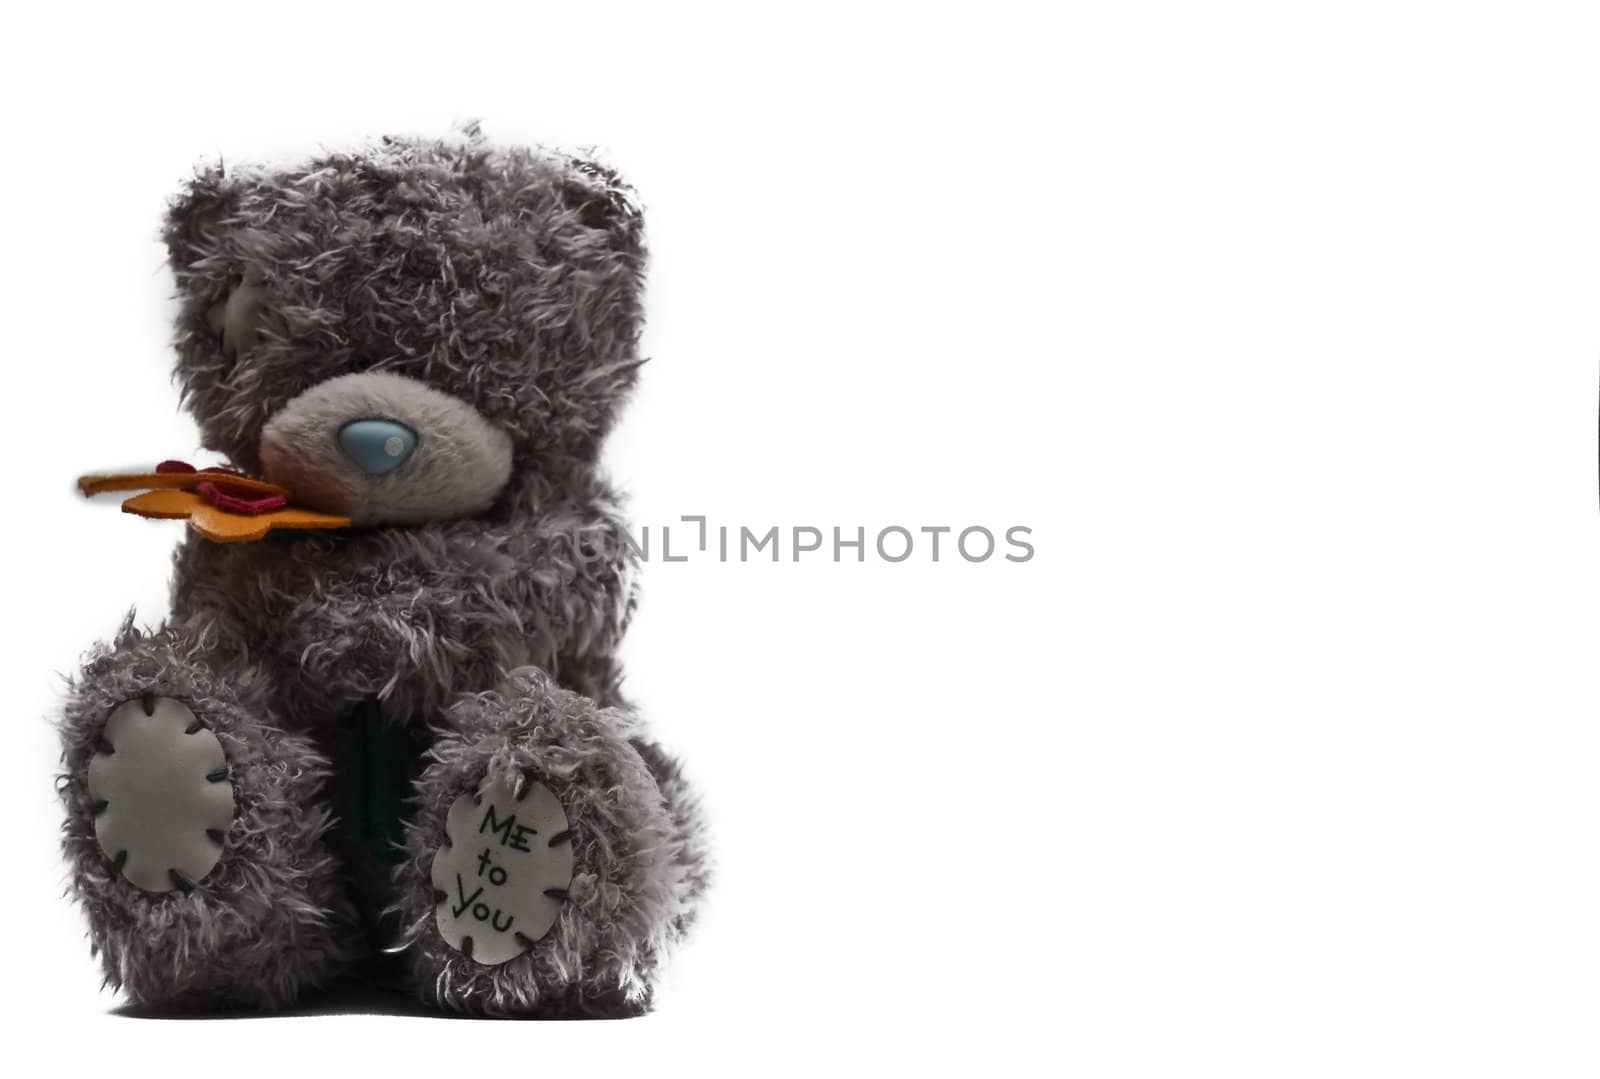 Grey teddy-bear with flowers as a background,greeting card